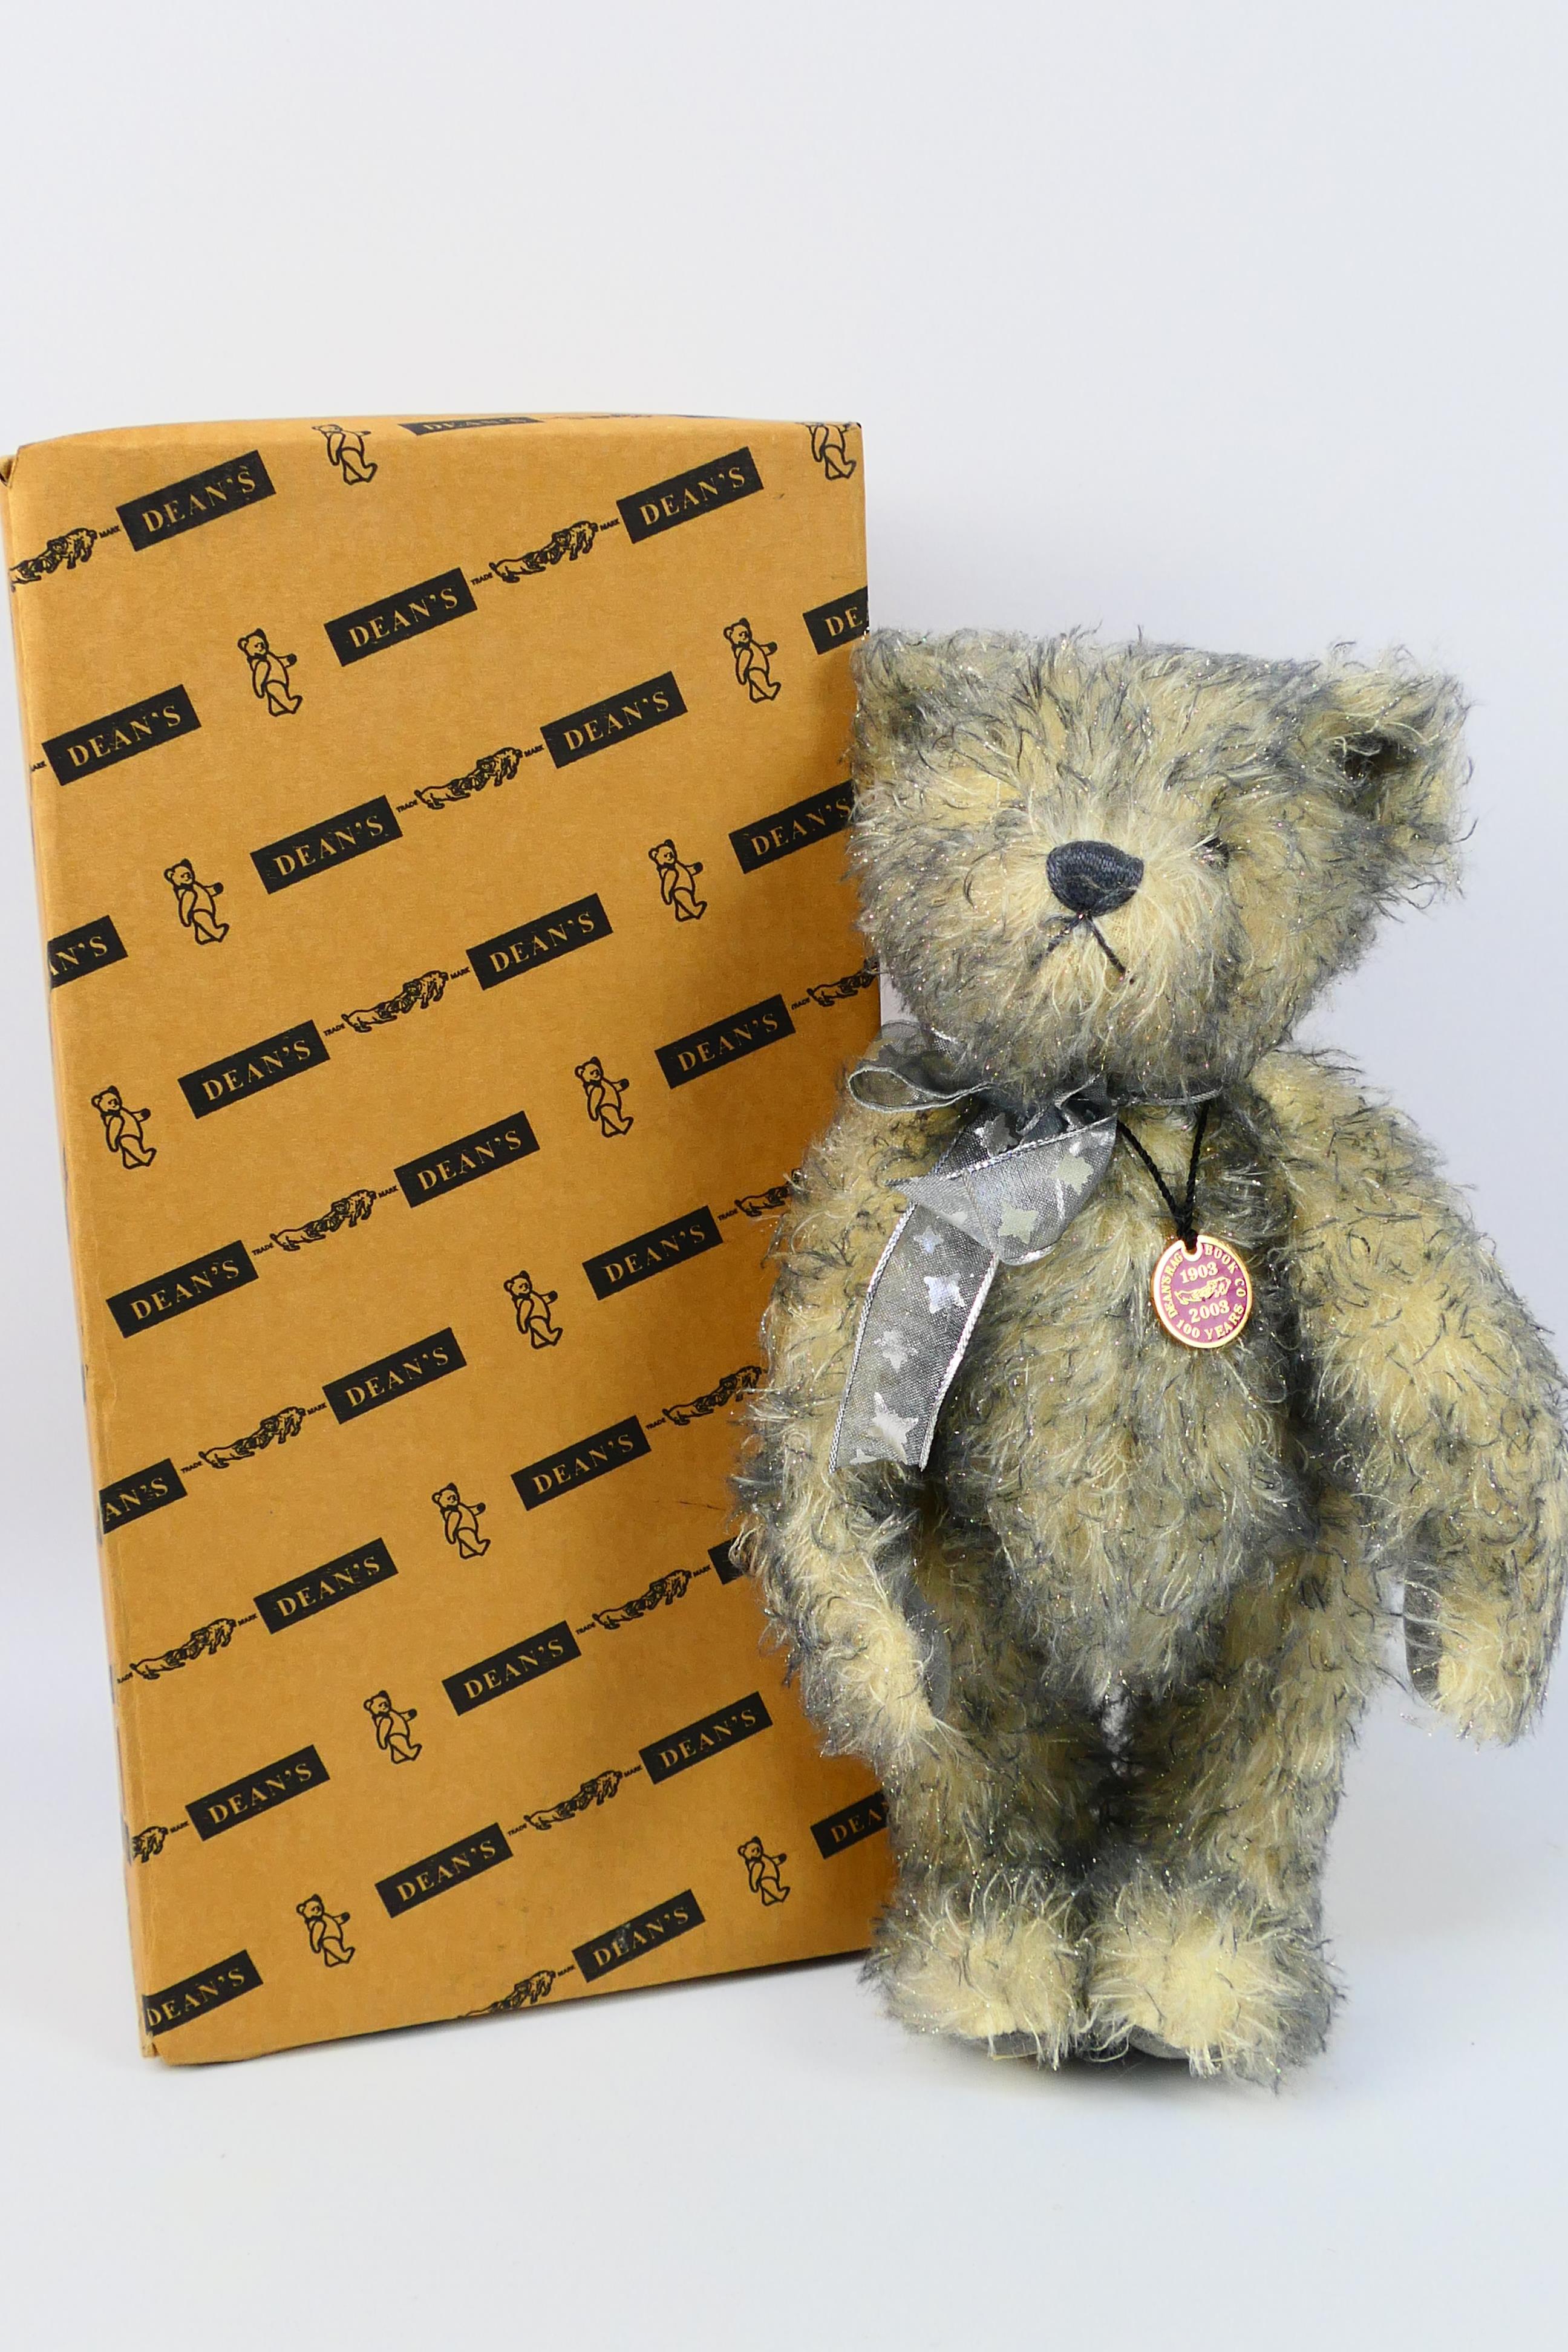 Deans Rag Book - A boxed limited edition 2003 Centenary bear named Tinsel number 23 of only 200